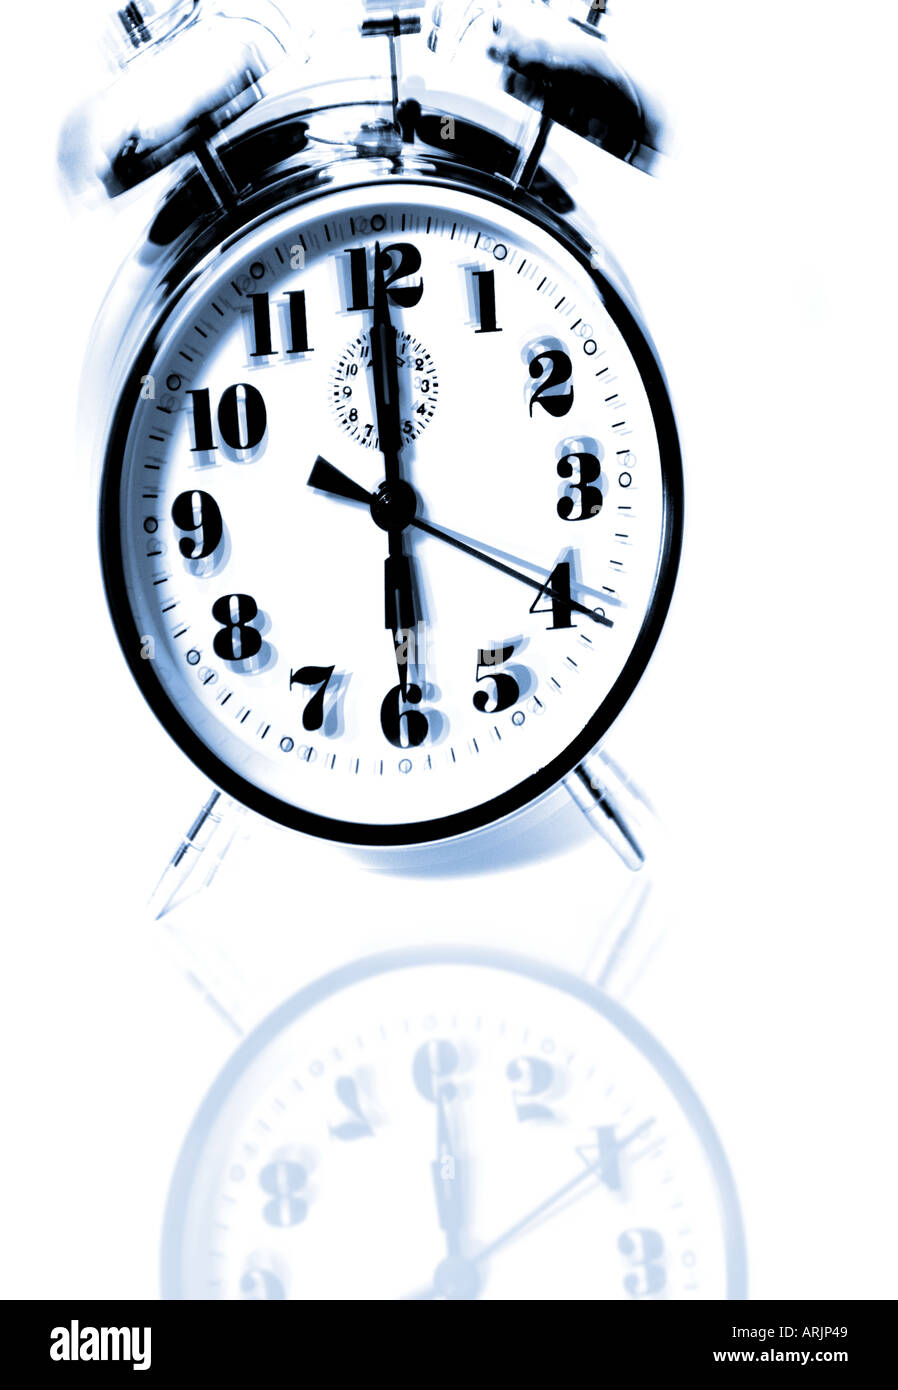 Alarm clock in white reflective surface Stock Photo